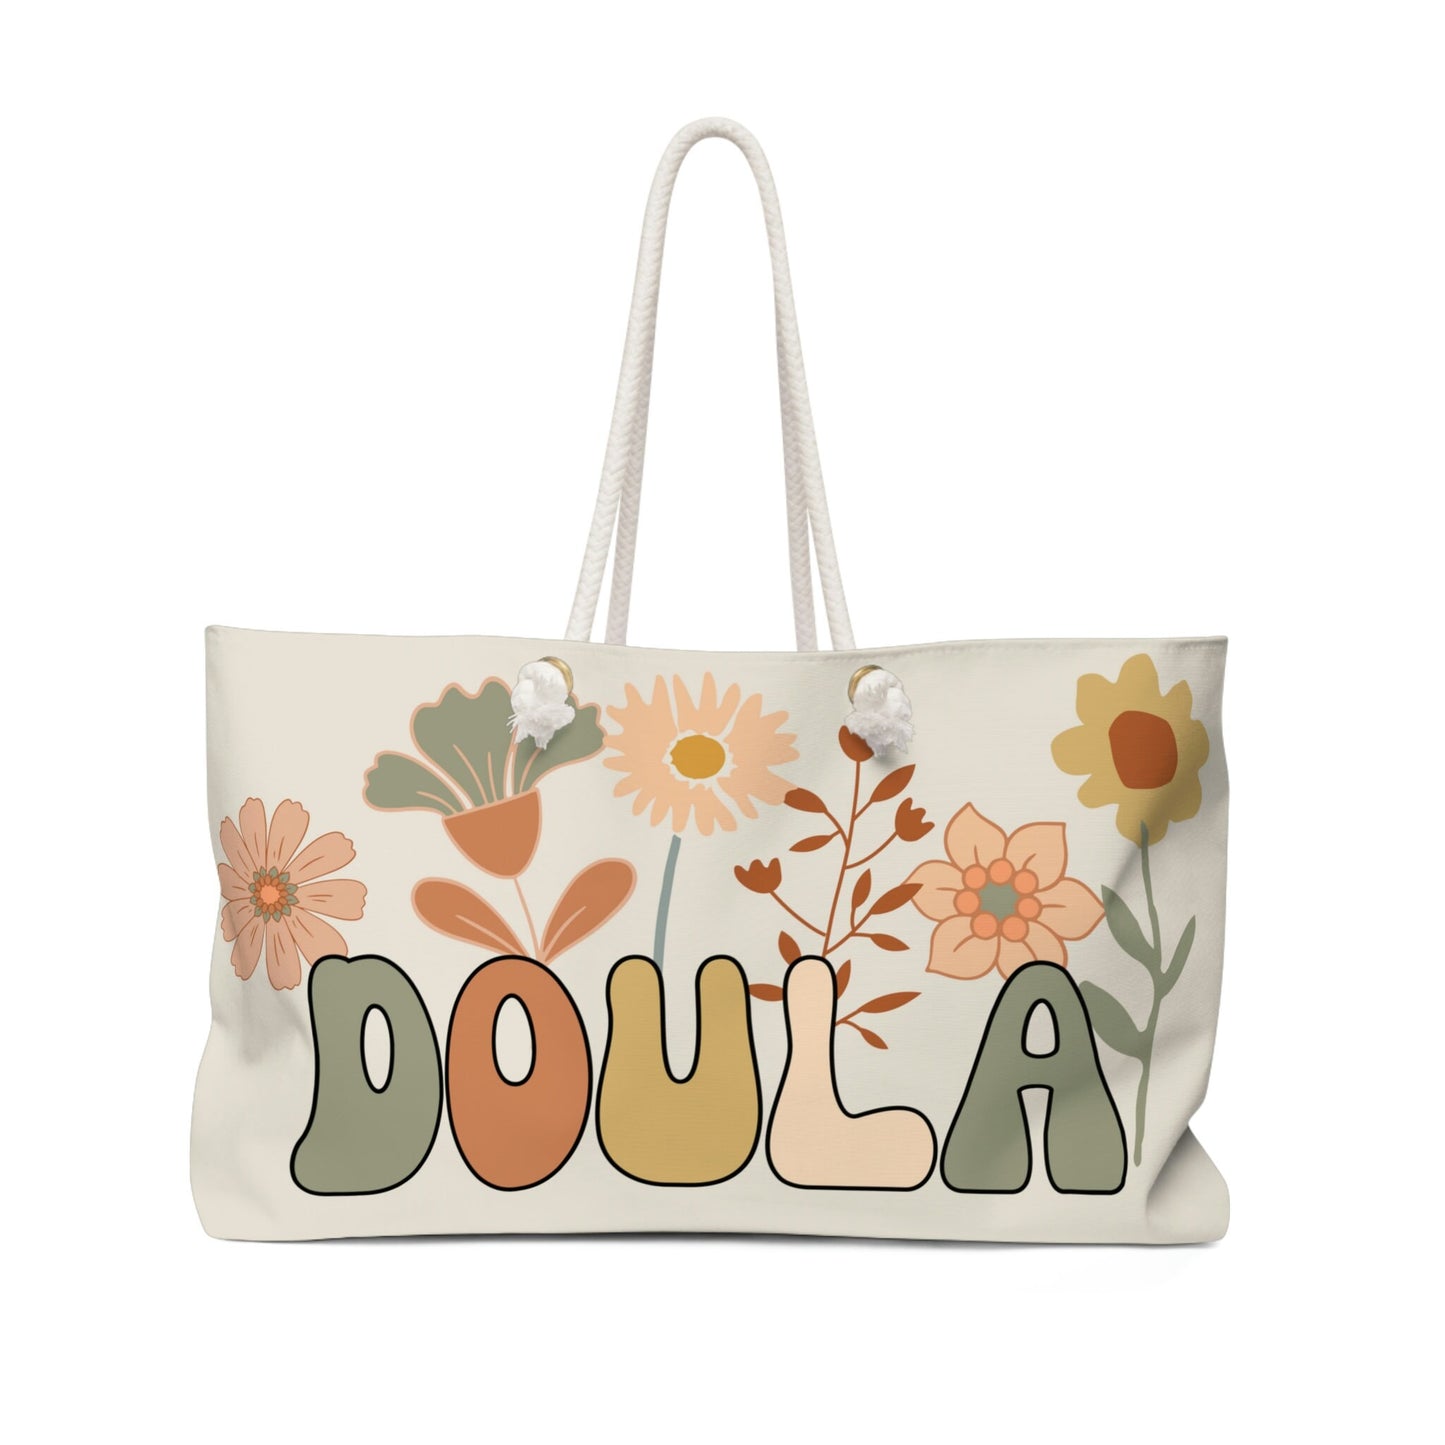 Doula Birth Bag, Doula Canvas tote bag, Postpartum Doula Gift Bag, Labor Doula Bag, Doula Business Tote, Doula Gift, Gift for Midwife